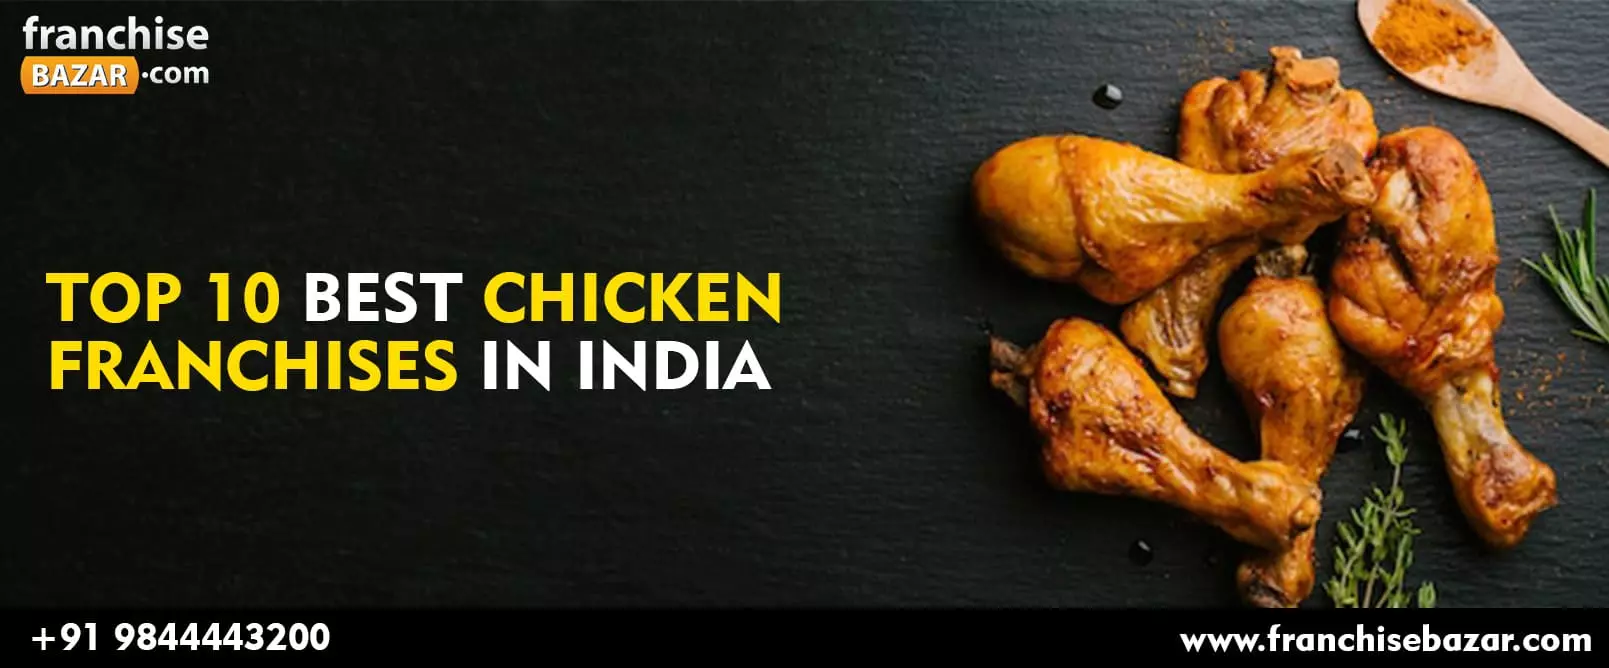 Find the Top 10 Best Chicken Franchises in India in 2022